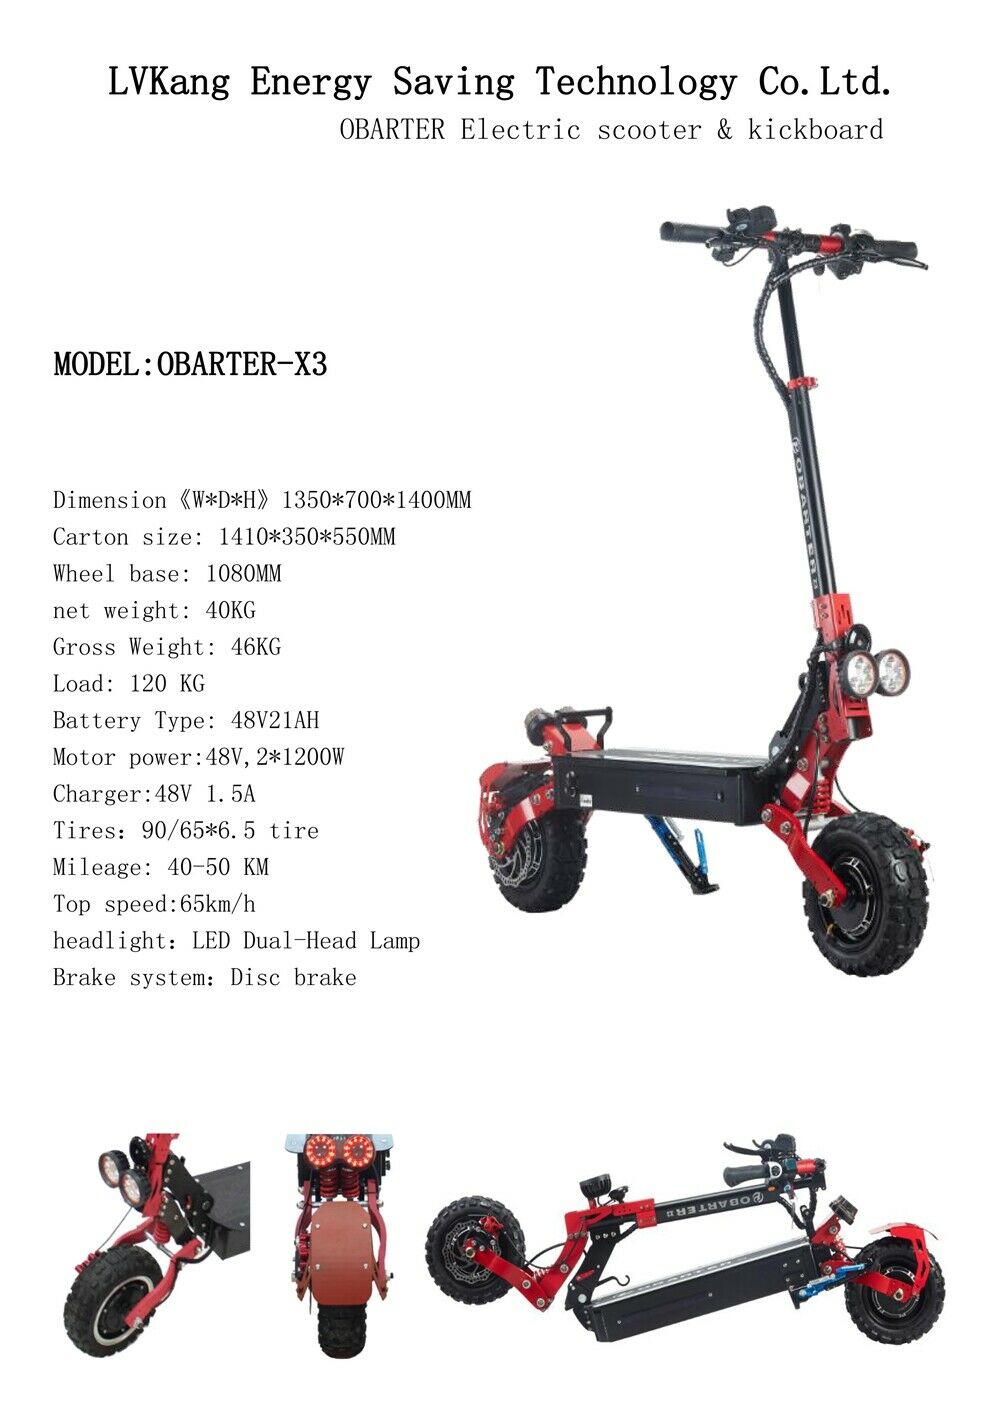 Blade X Pro - 2400w Electric Scooter - Freed Electric Scooters